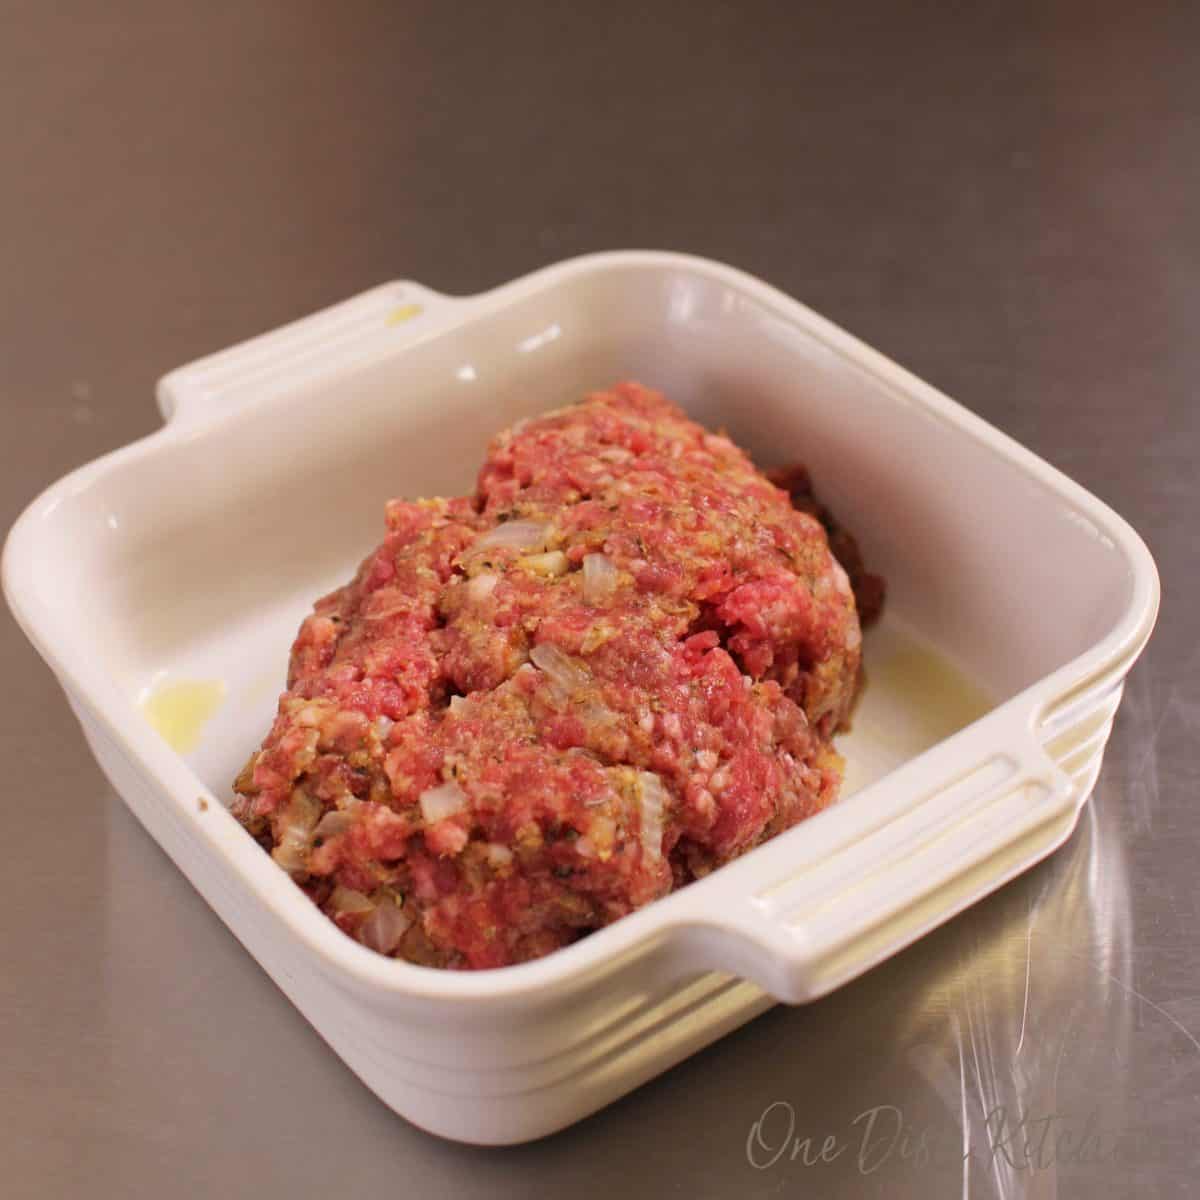 Uncooked meatloaf in a baking dish.